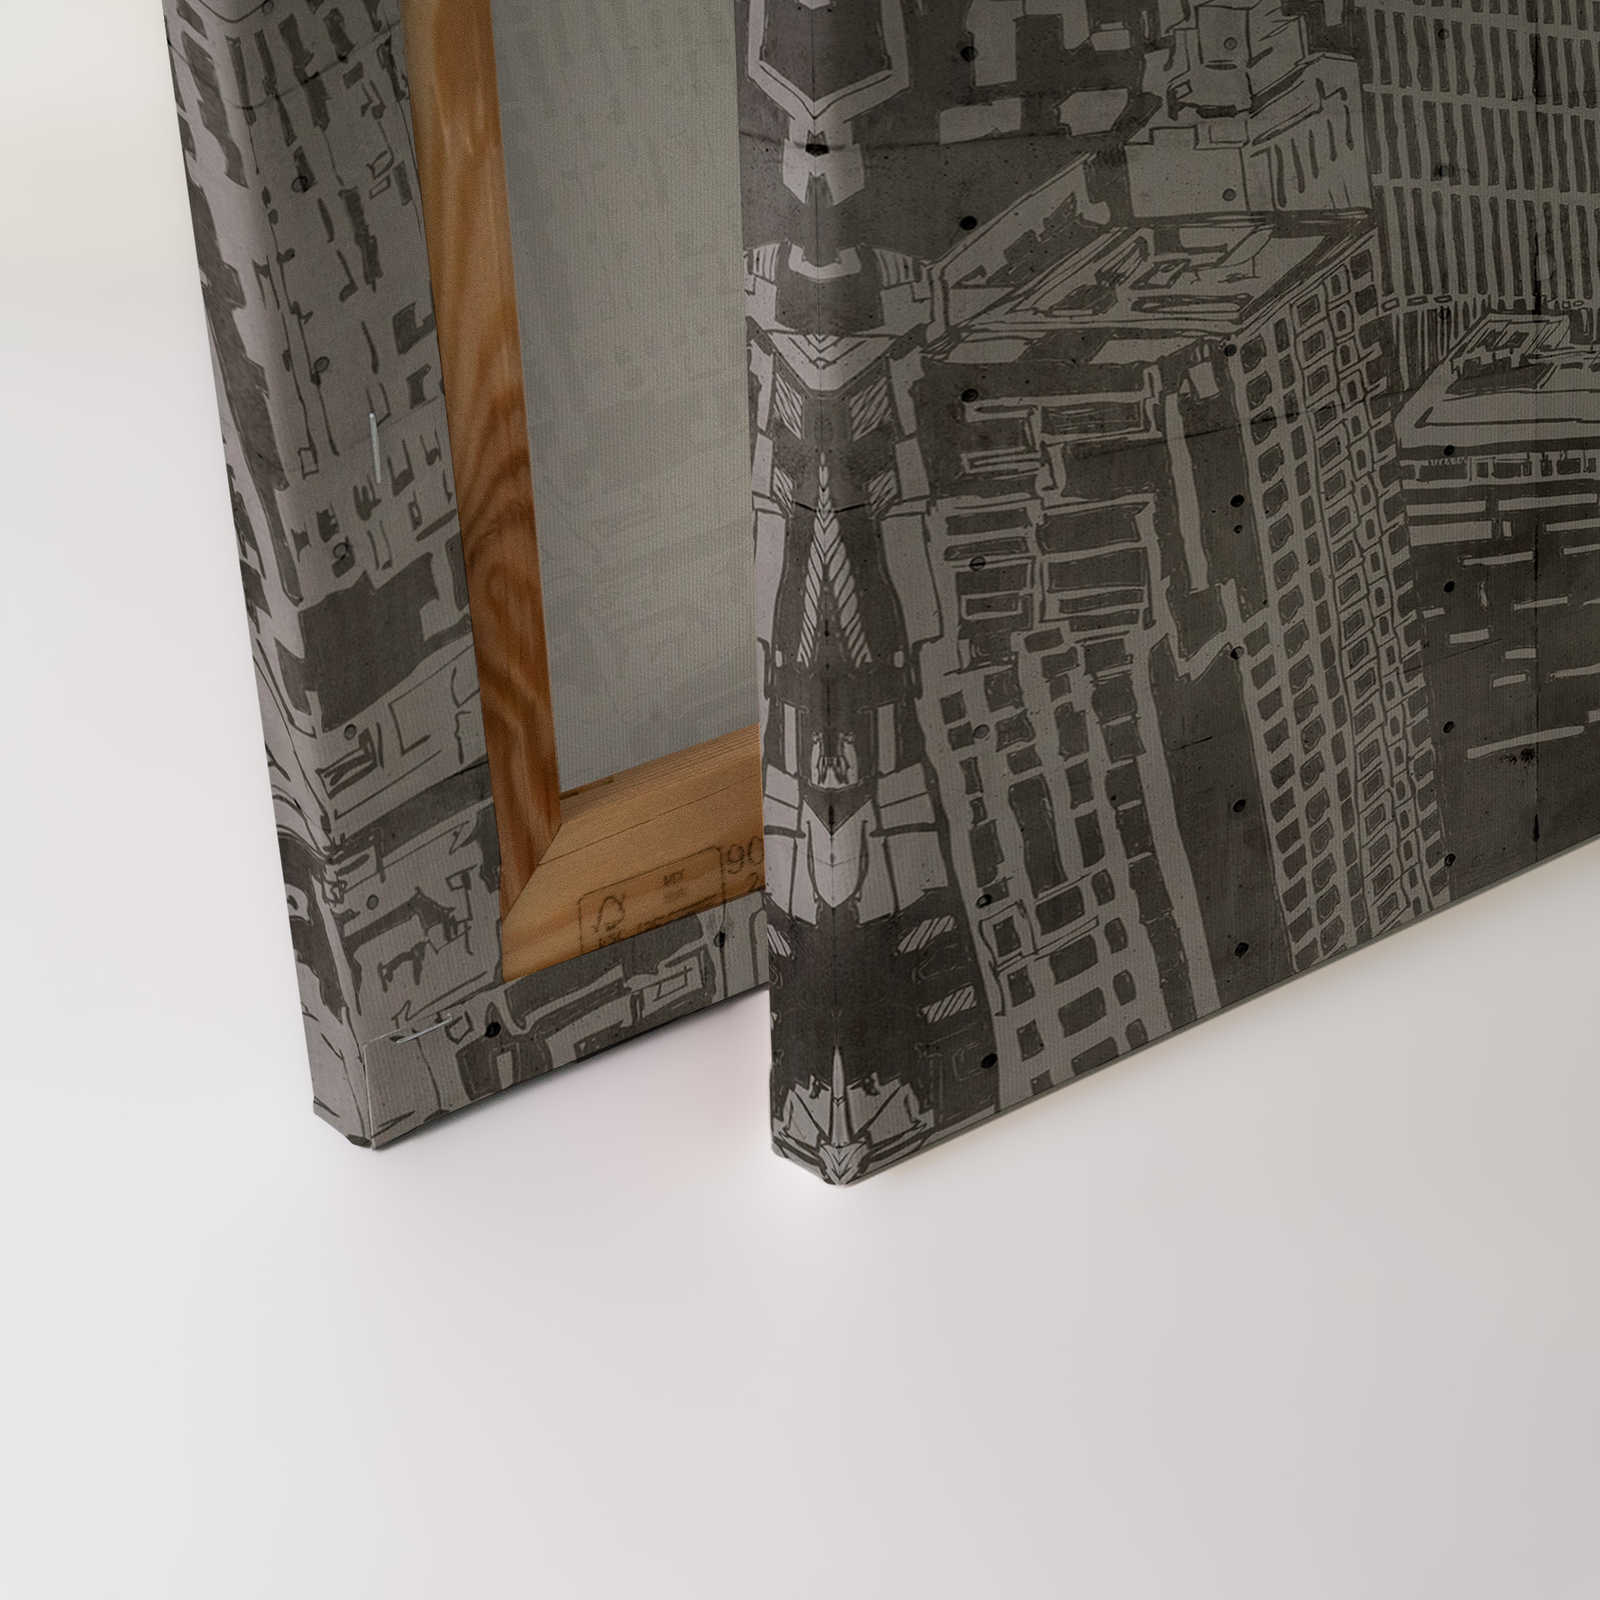             Downtown 2 - Concrete Structure Canvas Painting New York Look - 0.90 m x 0.60 m
        